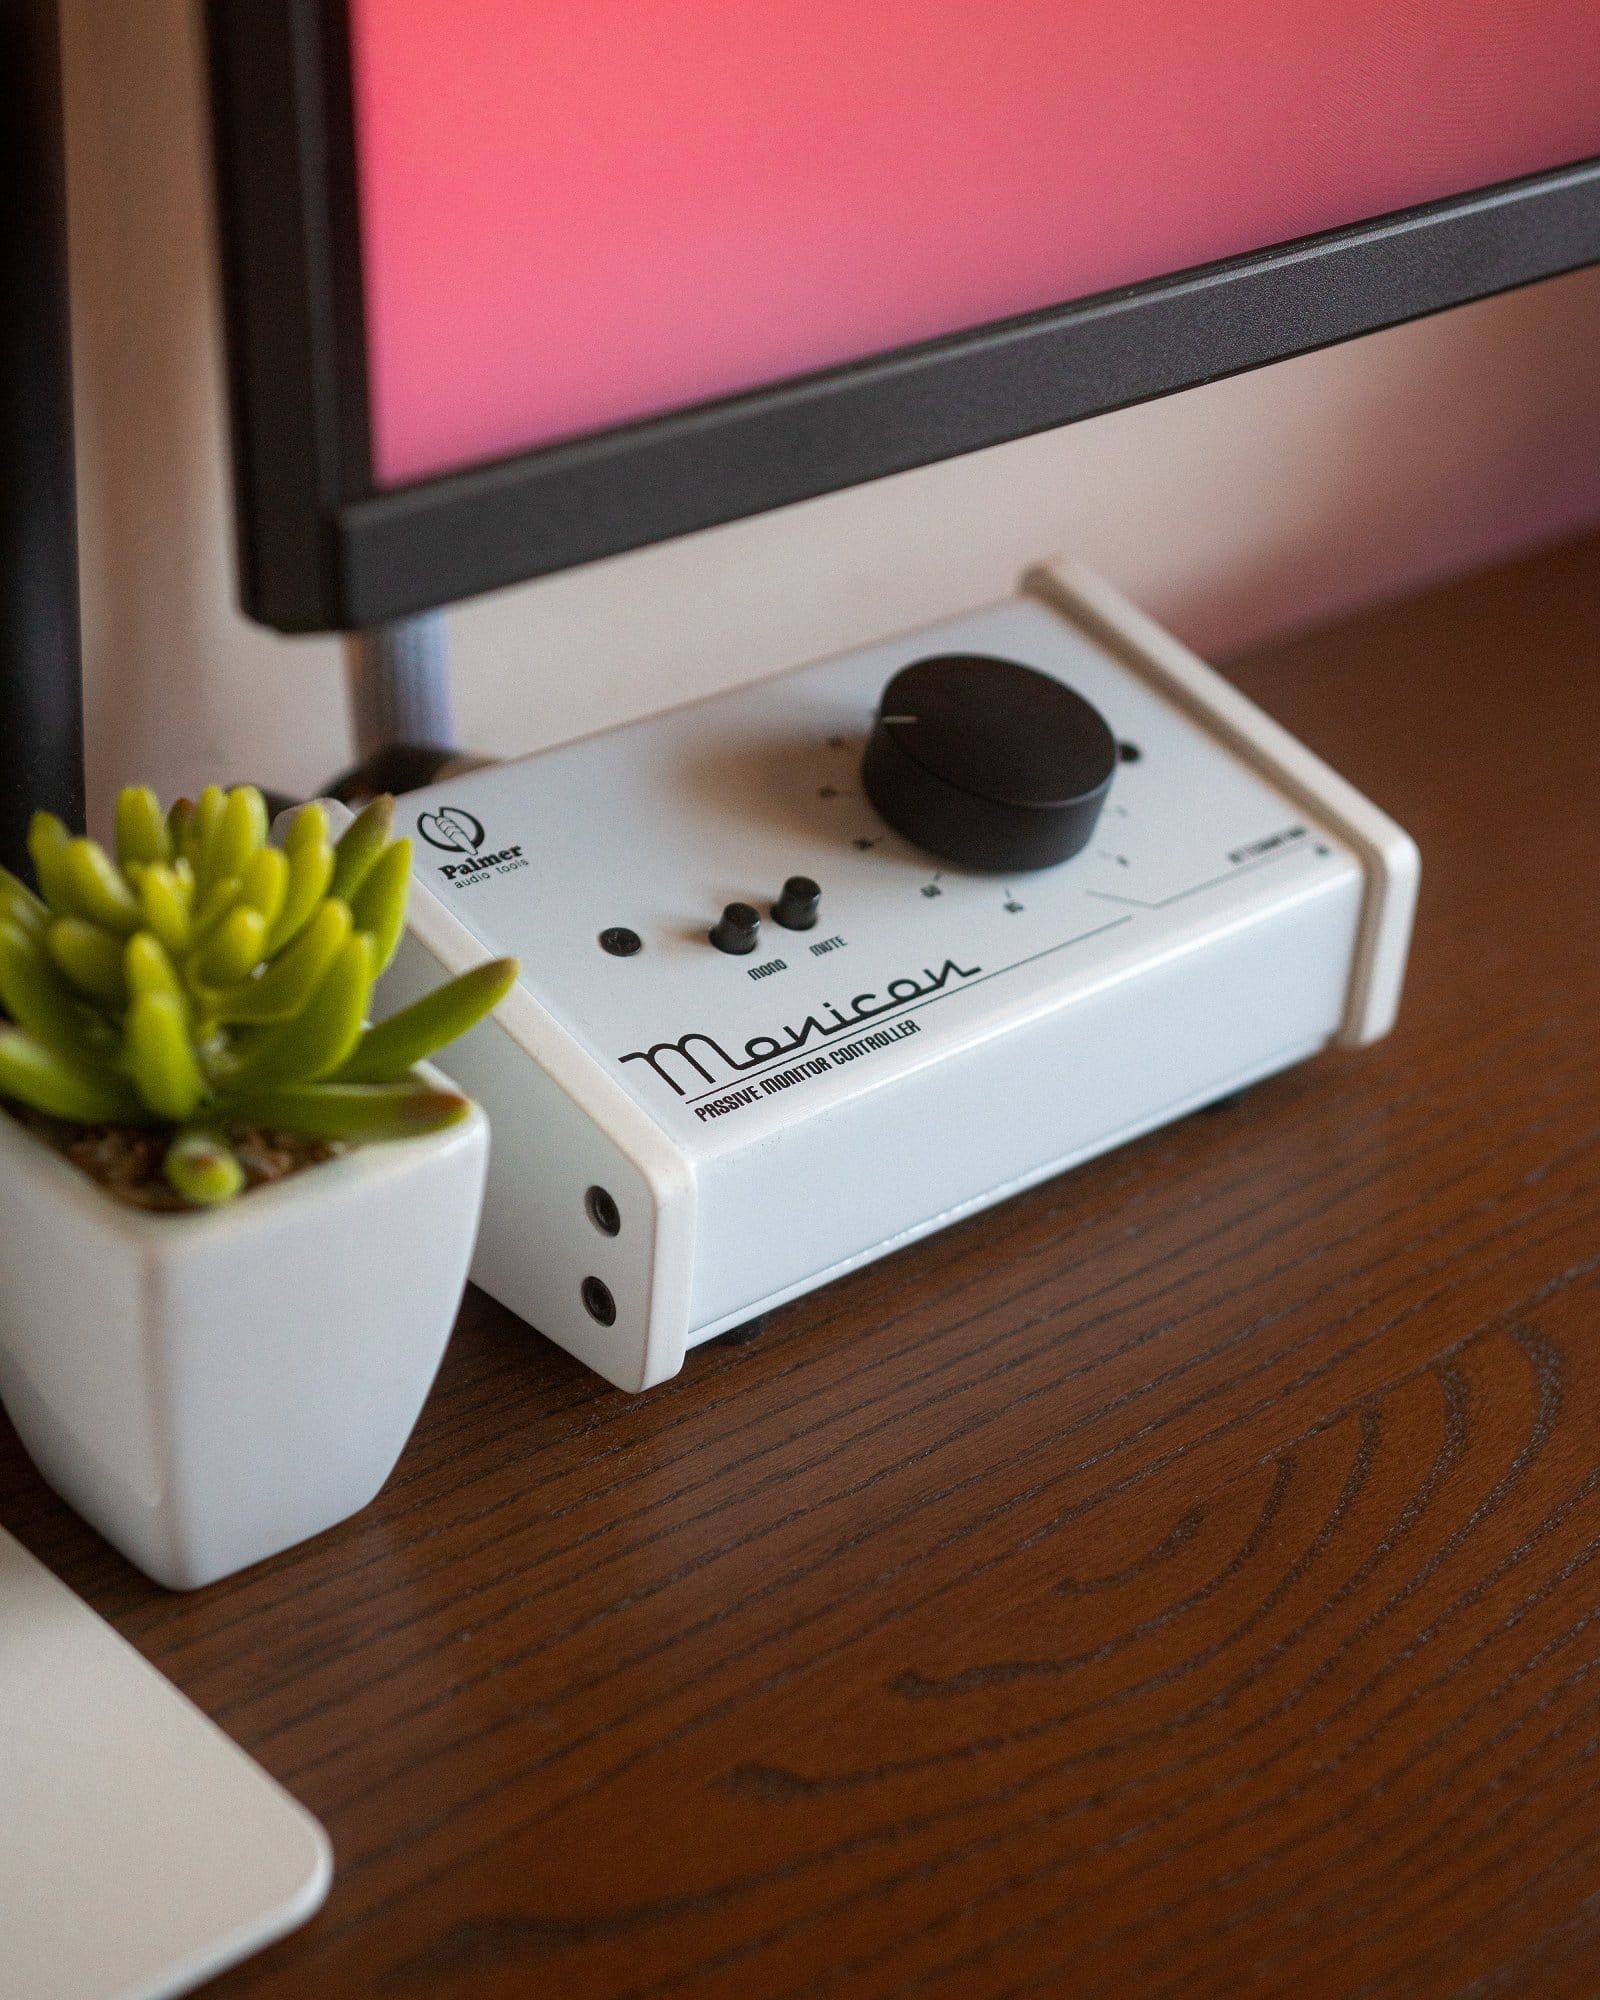 A close-up view of a desk corner showing a succulent plant in a white pot, part of a trackpad, and a monitor controller with knobs and buttons, adjacent to a computer monitor with a pinkish screen